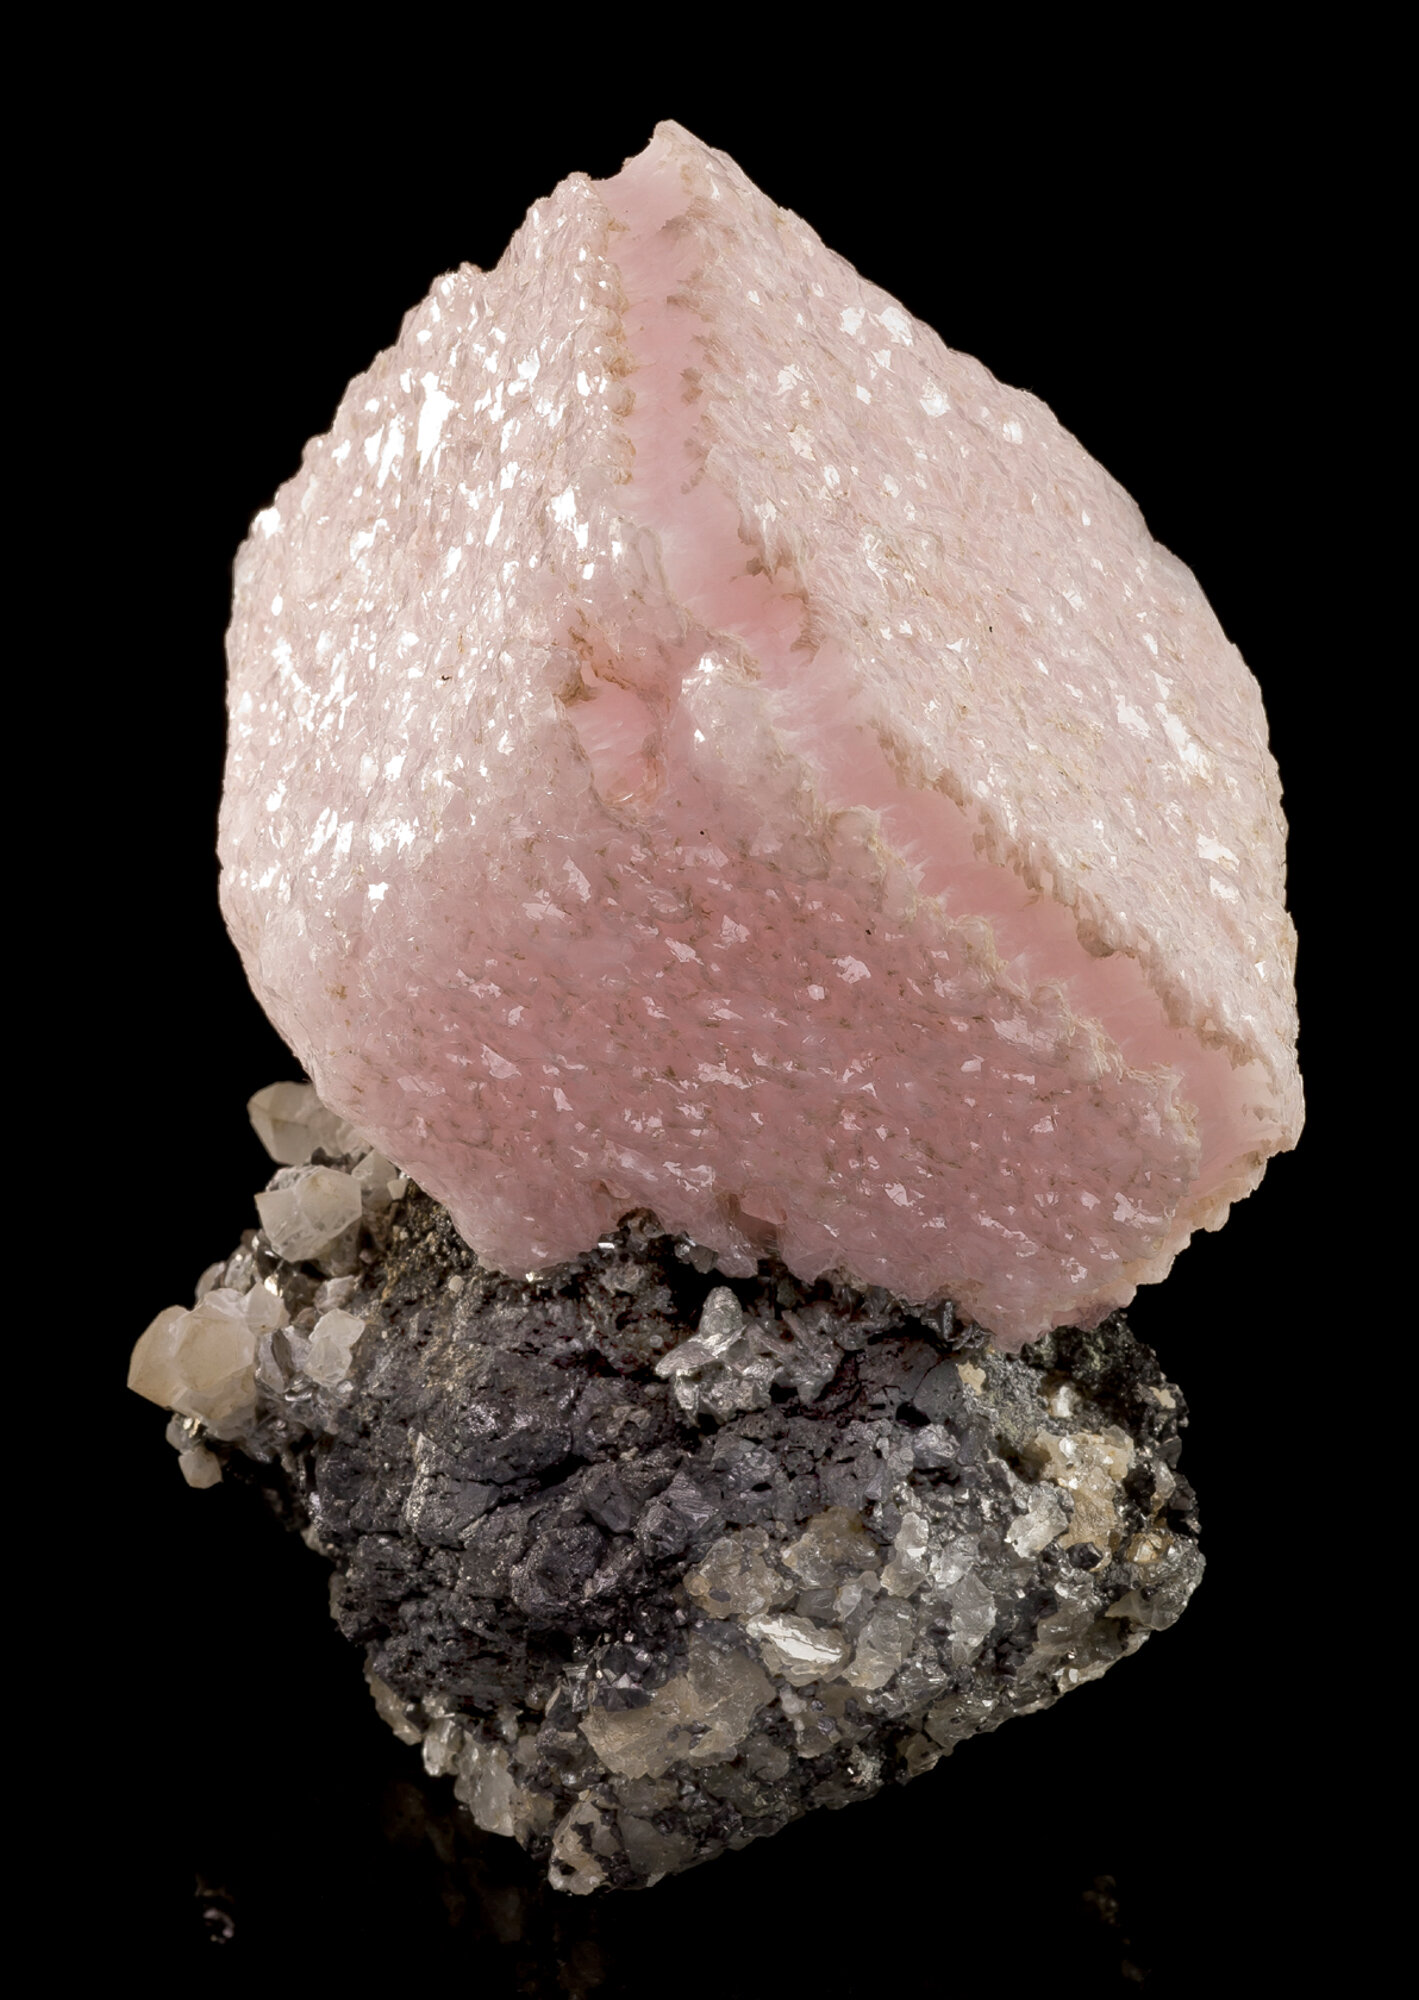  Pink calcite crystal group, 16.5 cm, from Huanggang mine No. 5, Keshiketeng County, Chifeng Prefecture, Inner Mongolia Province, China. Found in 2011. Normal light. 